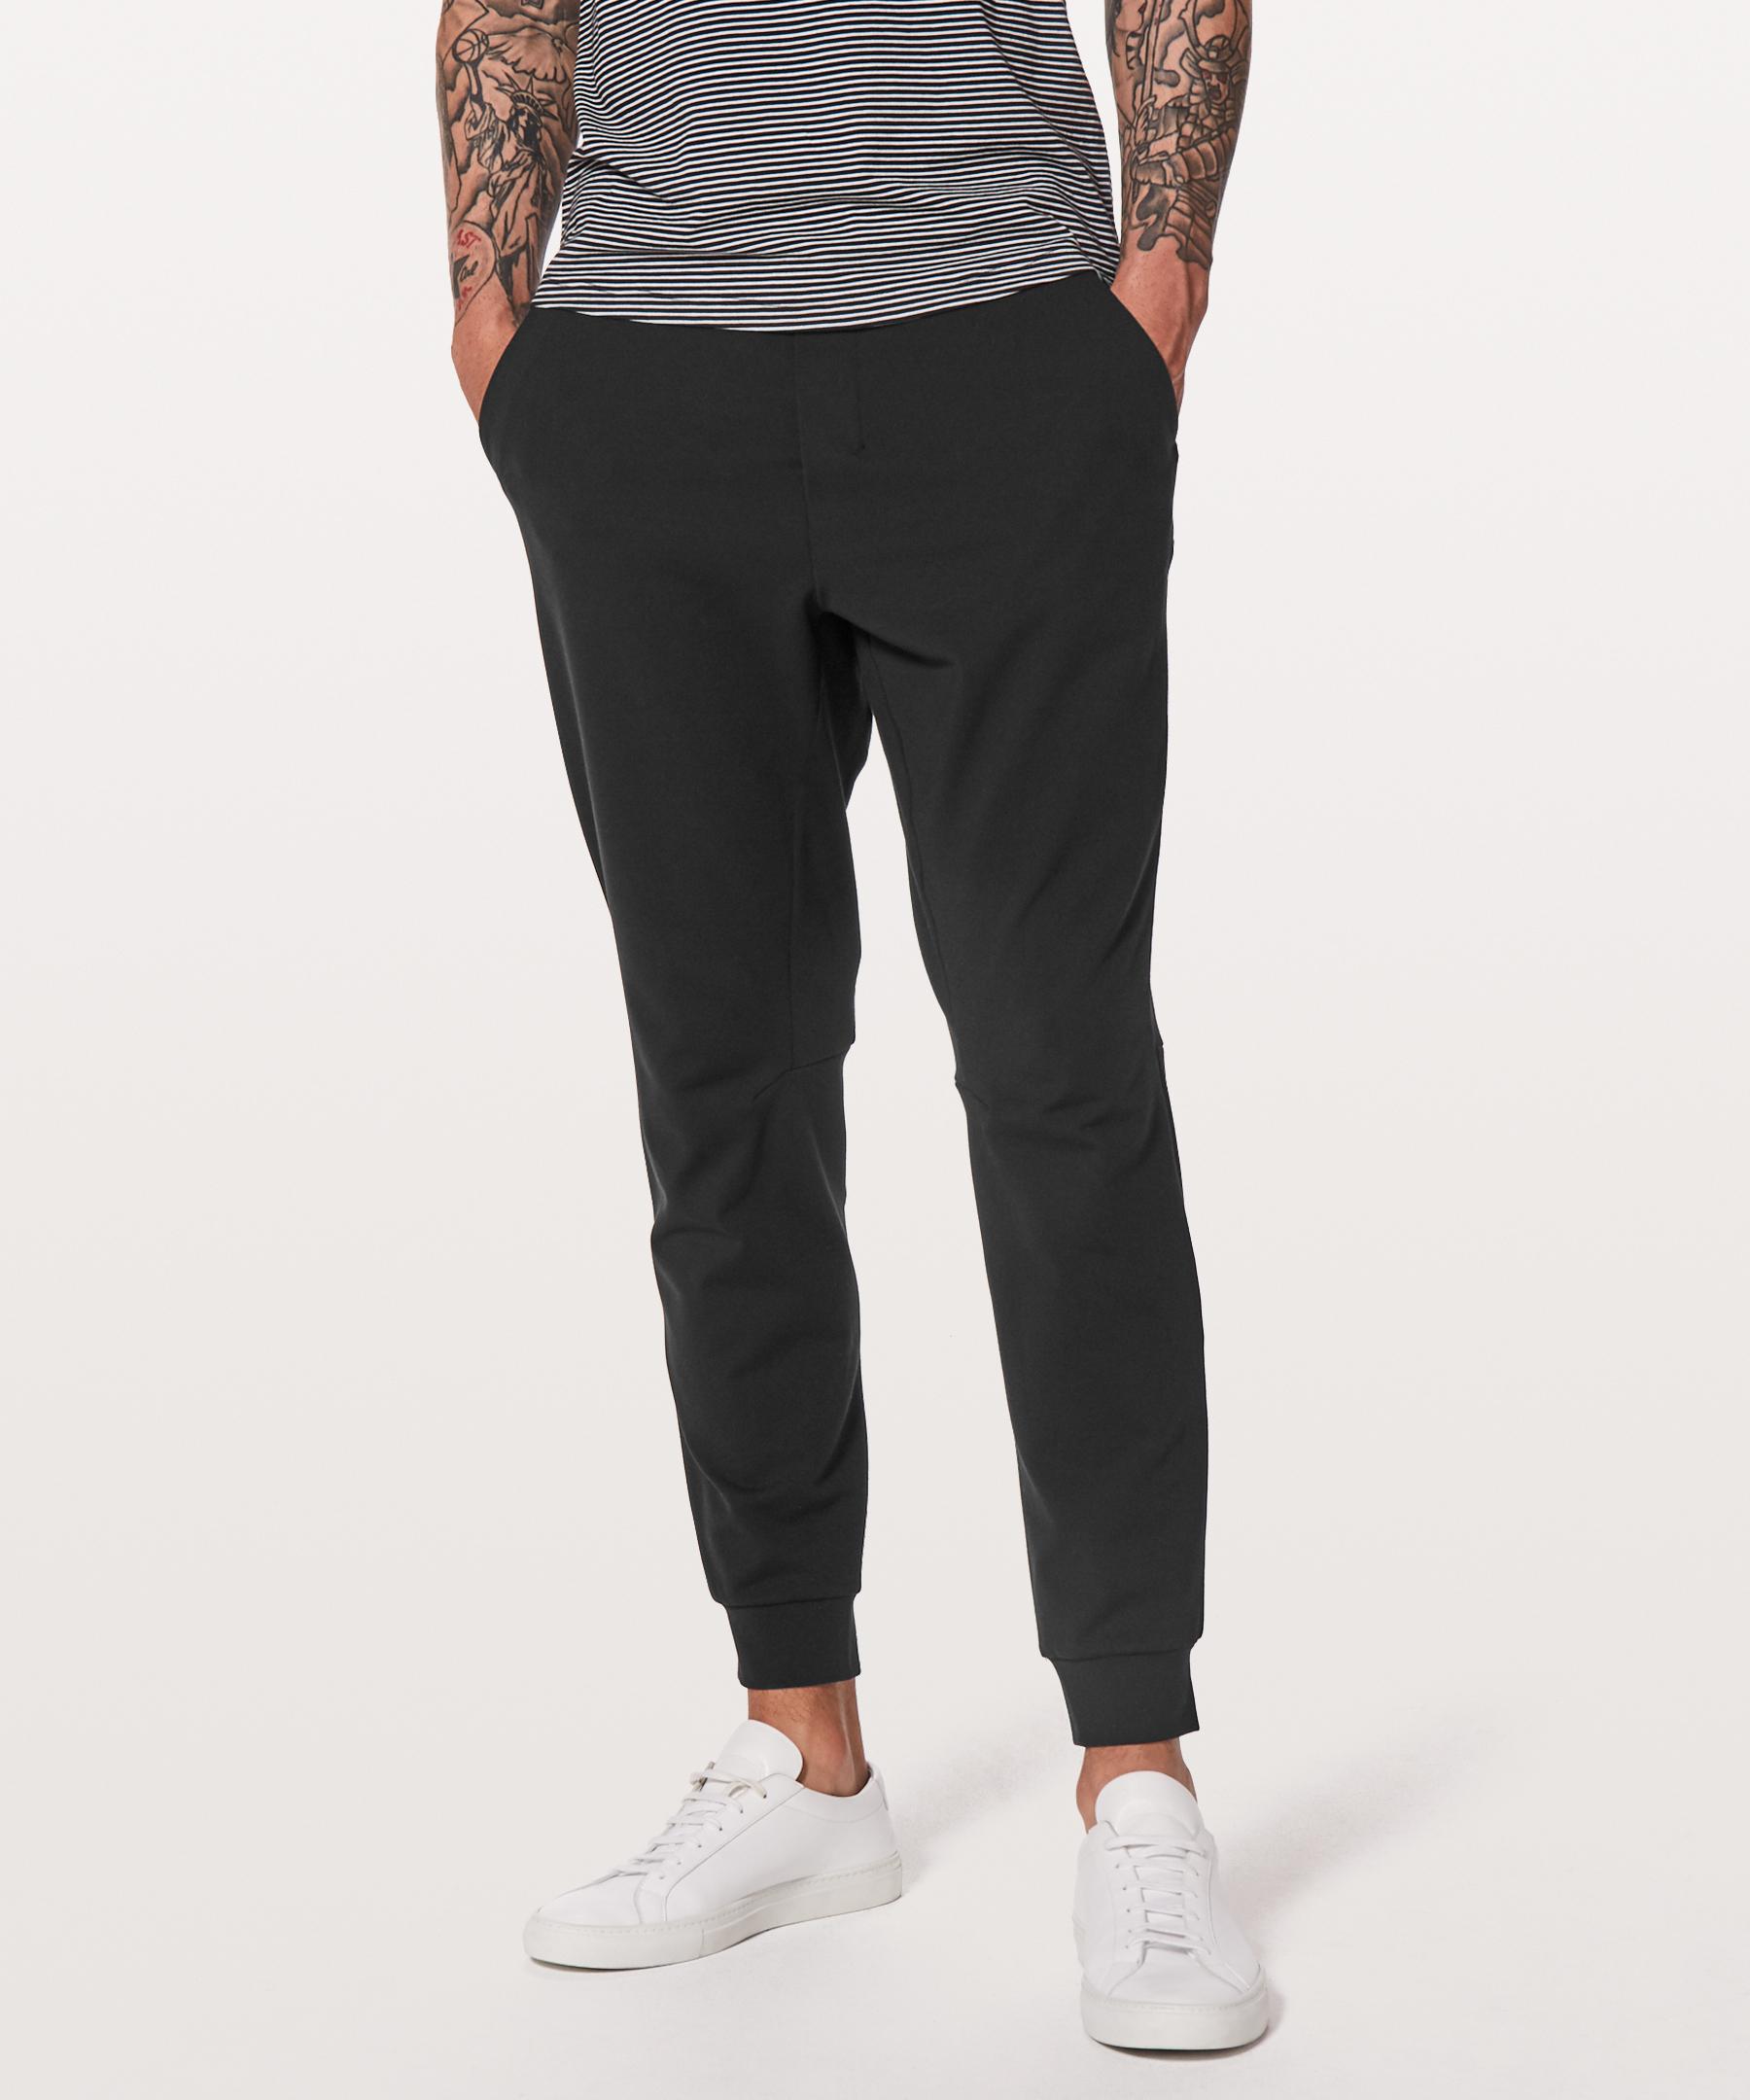 Lululemon Mens Joggers Sale  International Society of Precision Agriculture